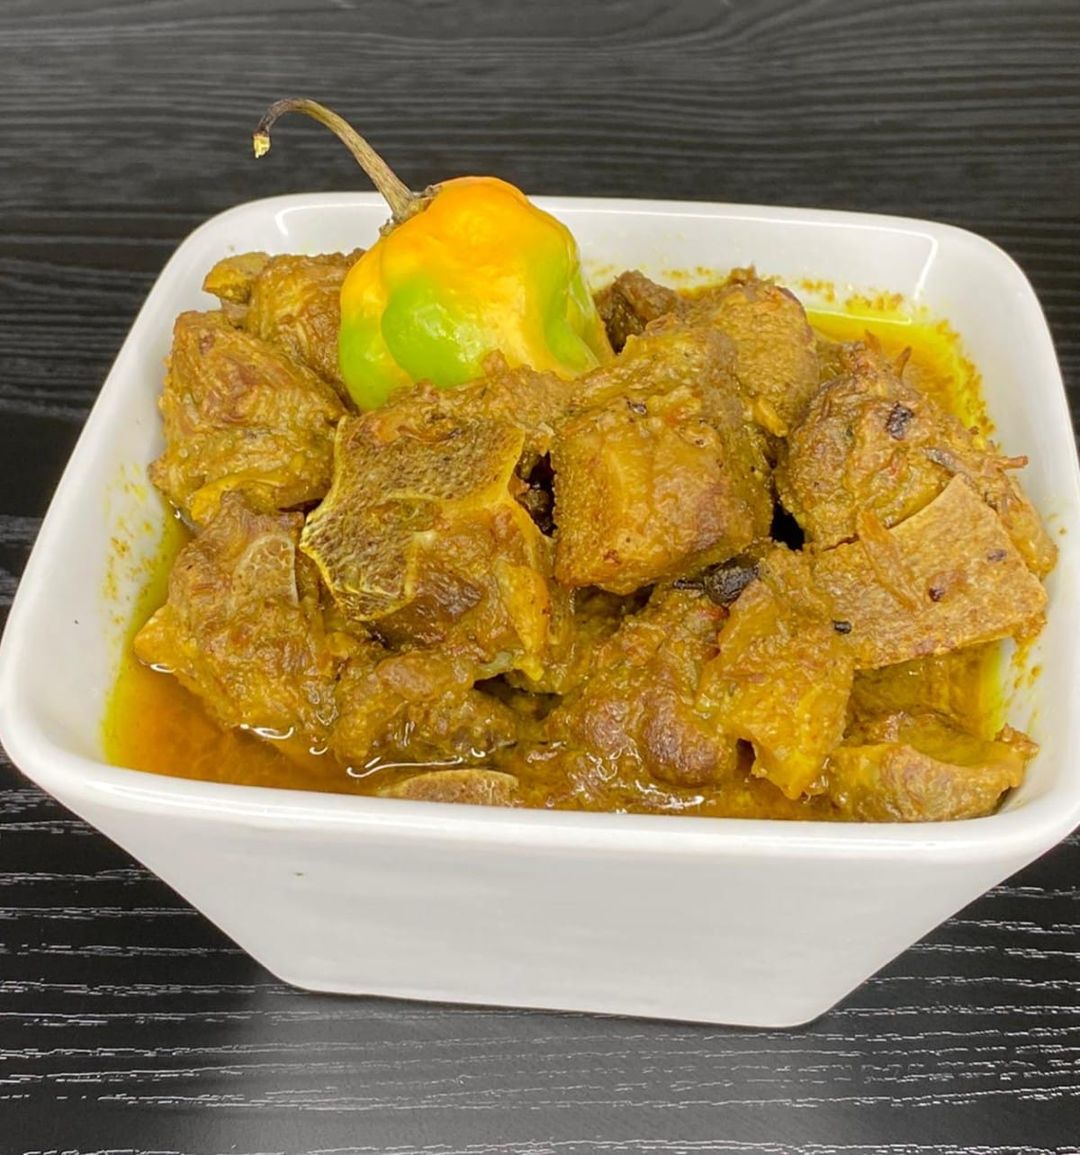 New Jamaican restaurant opens in Sarnia, Ontario - Curry Goat